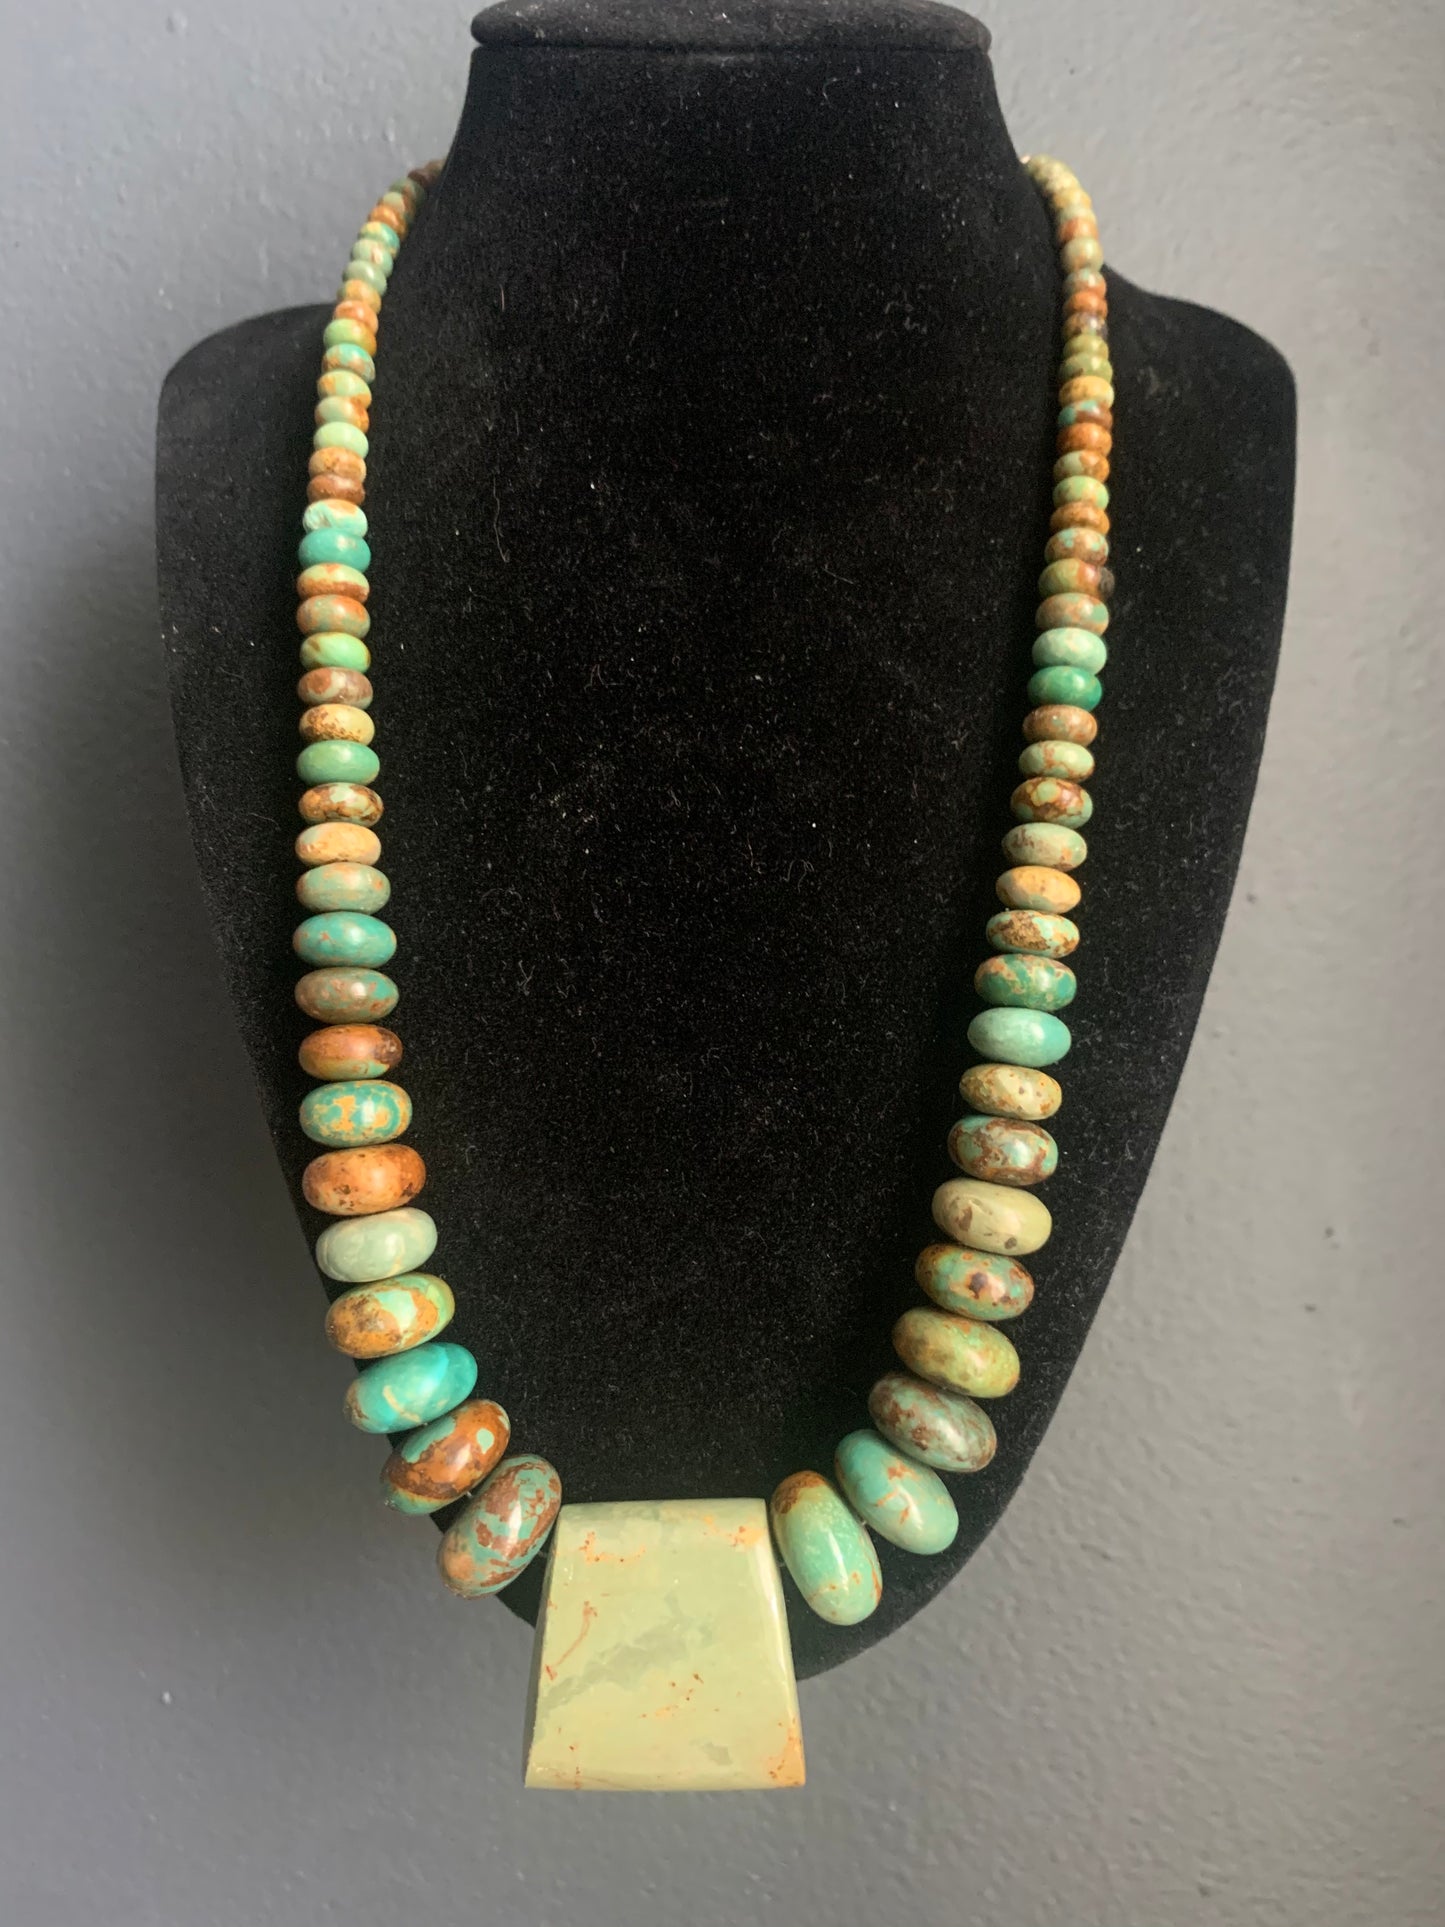 A turquoise necklace